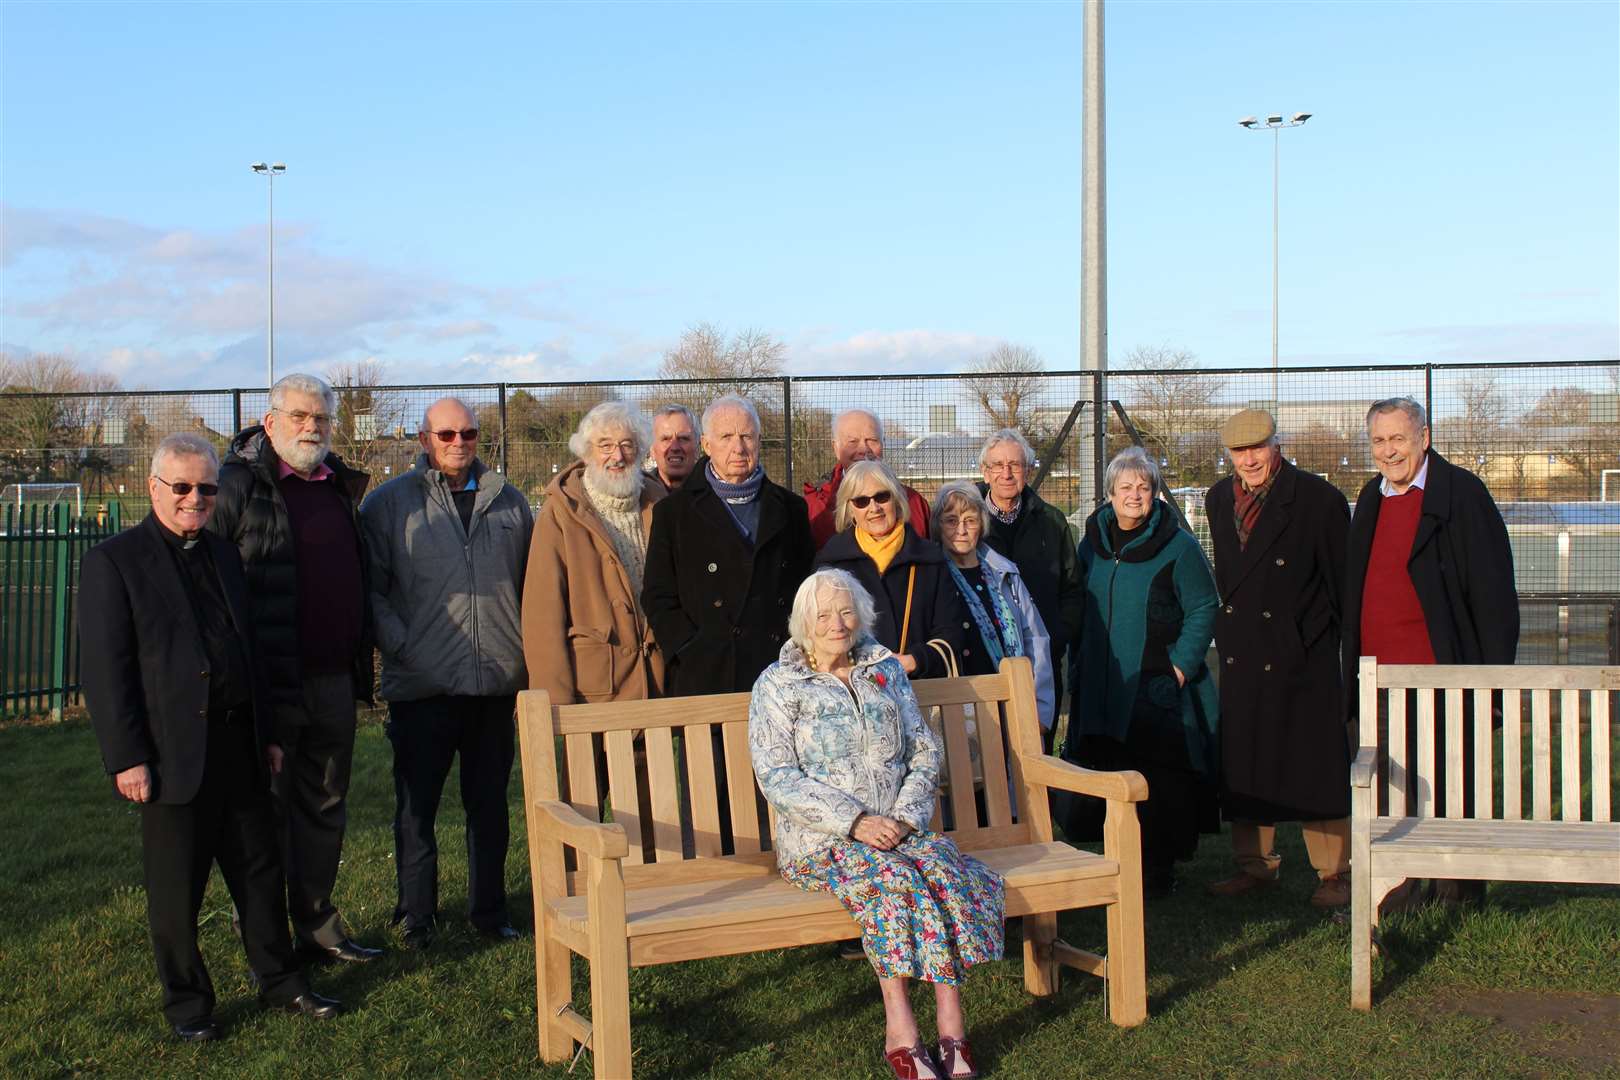 Family and former colleagues of Jim Stacey gathered for the unveiling of the bench